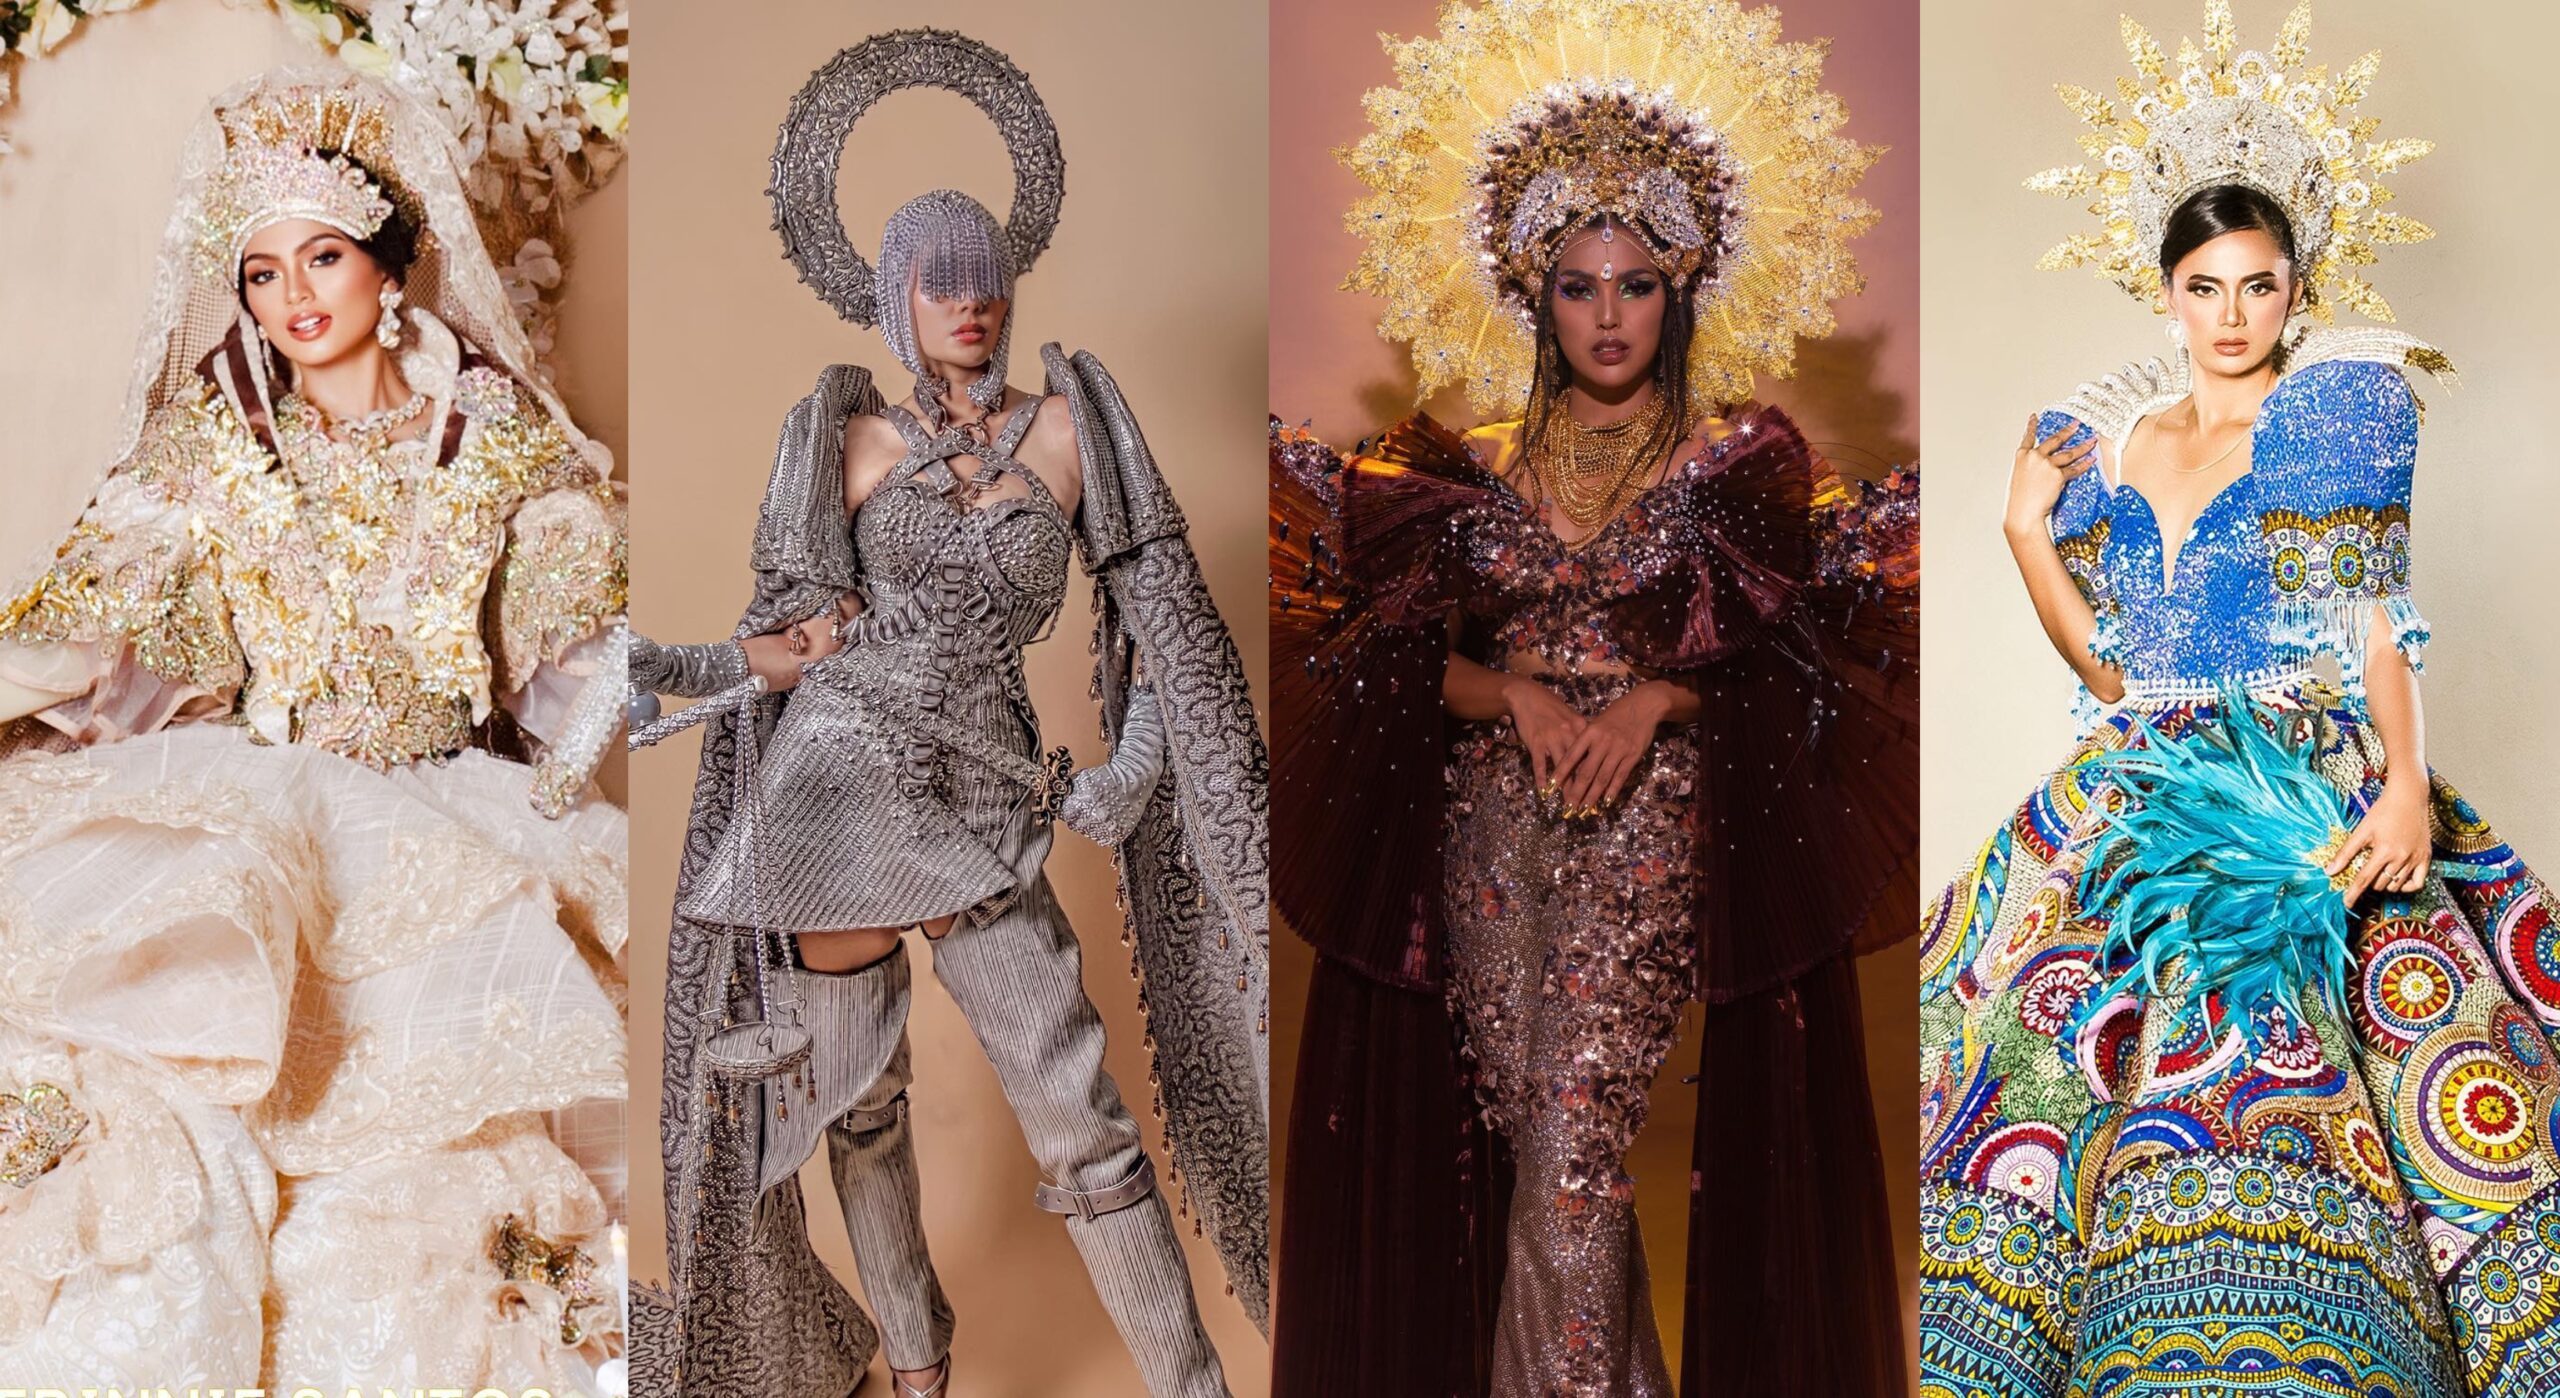 IN PHOTOS Miss World Philippines 2022 candidates in national costume